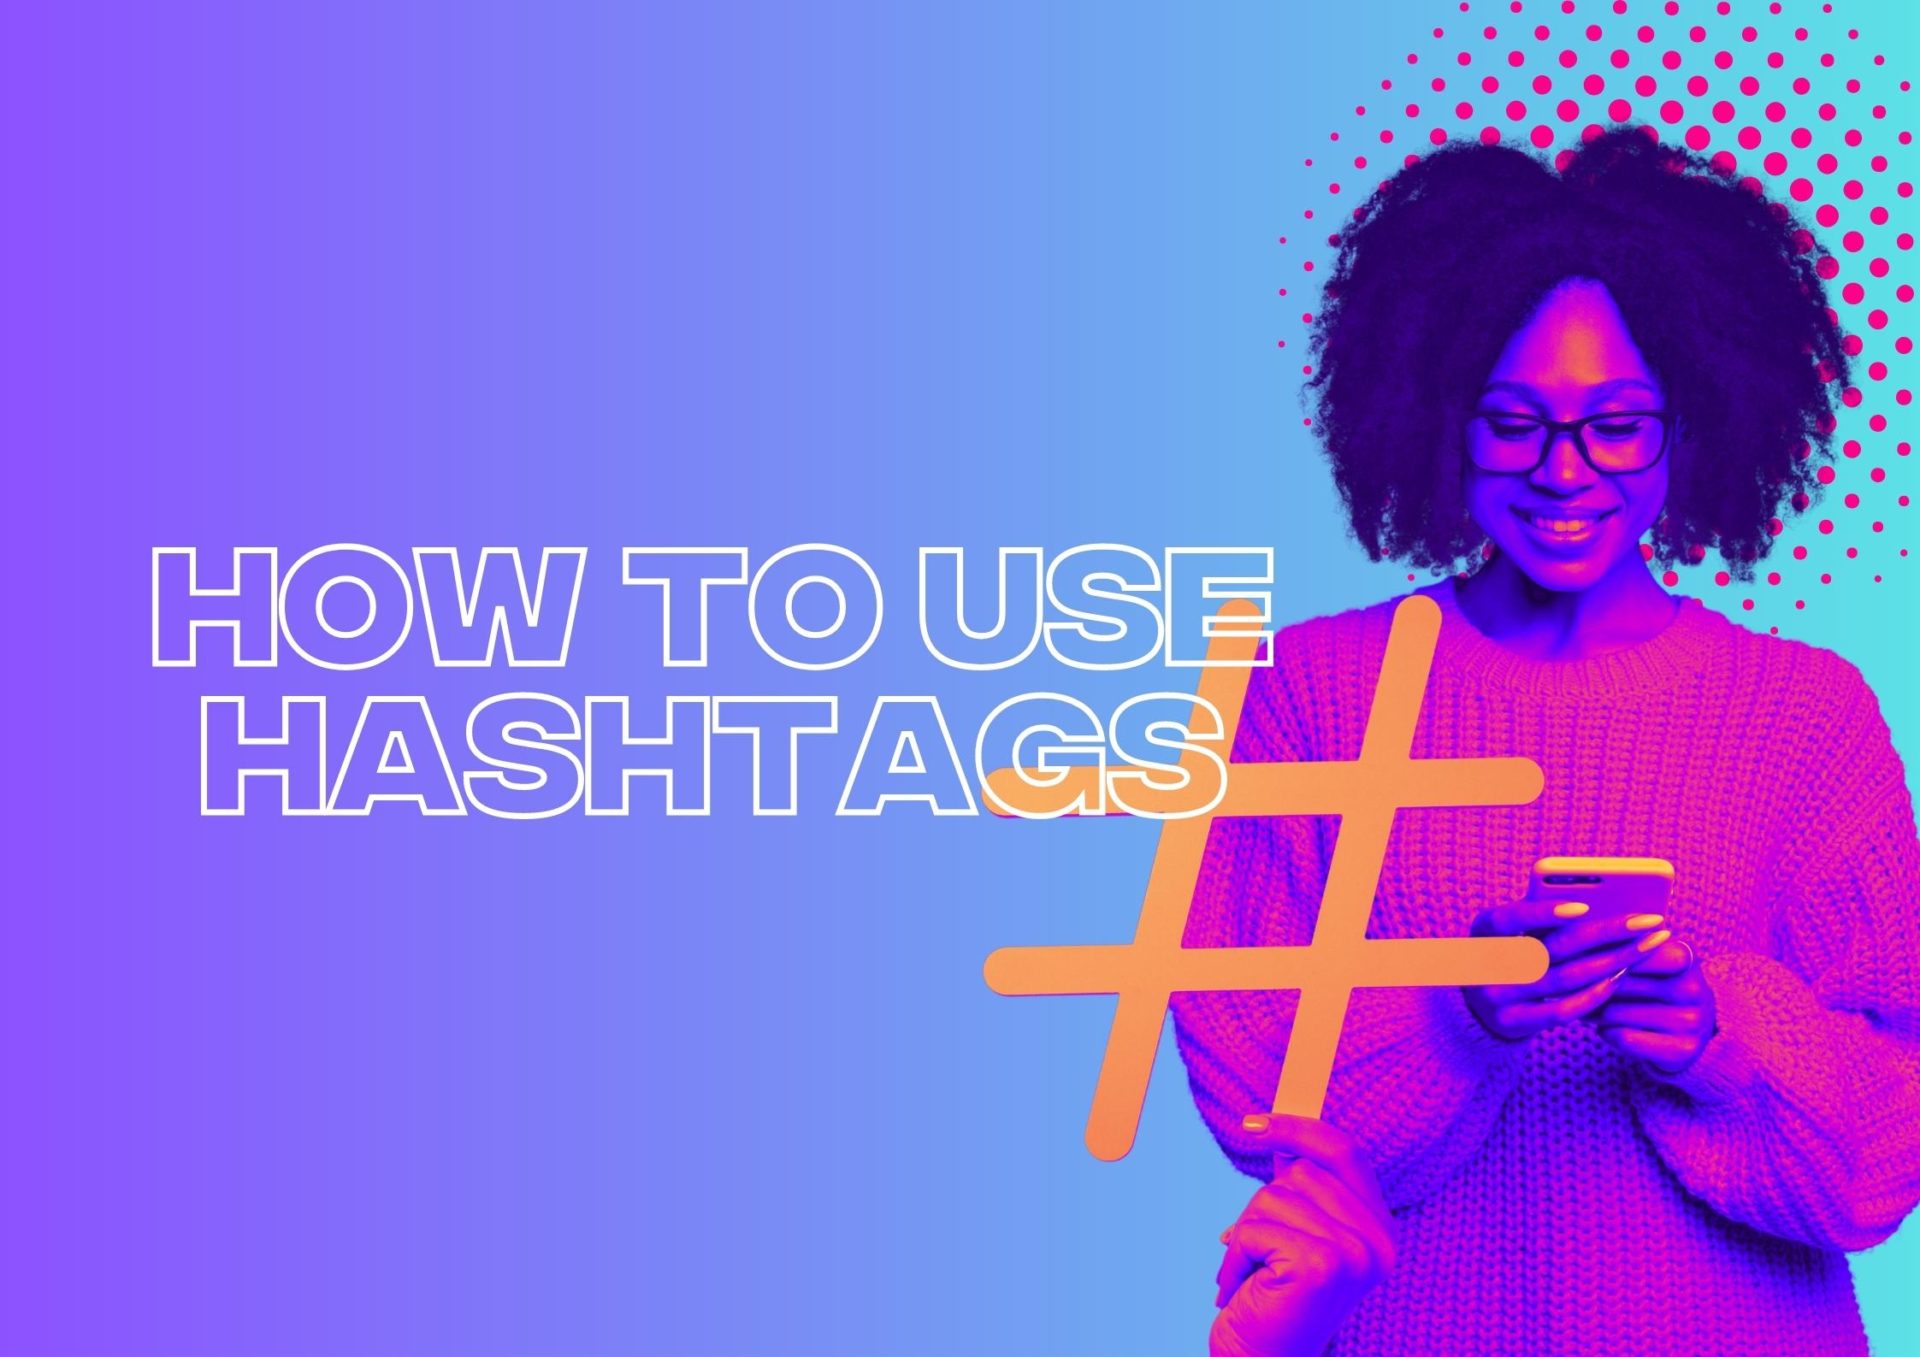 How To Use Hashtags On Social Media Effectively